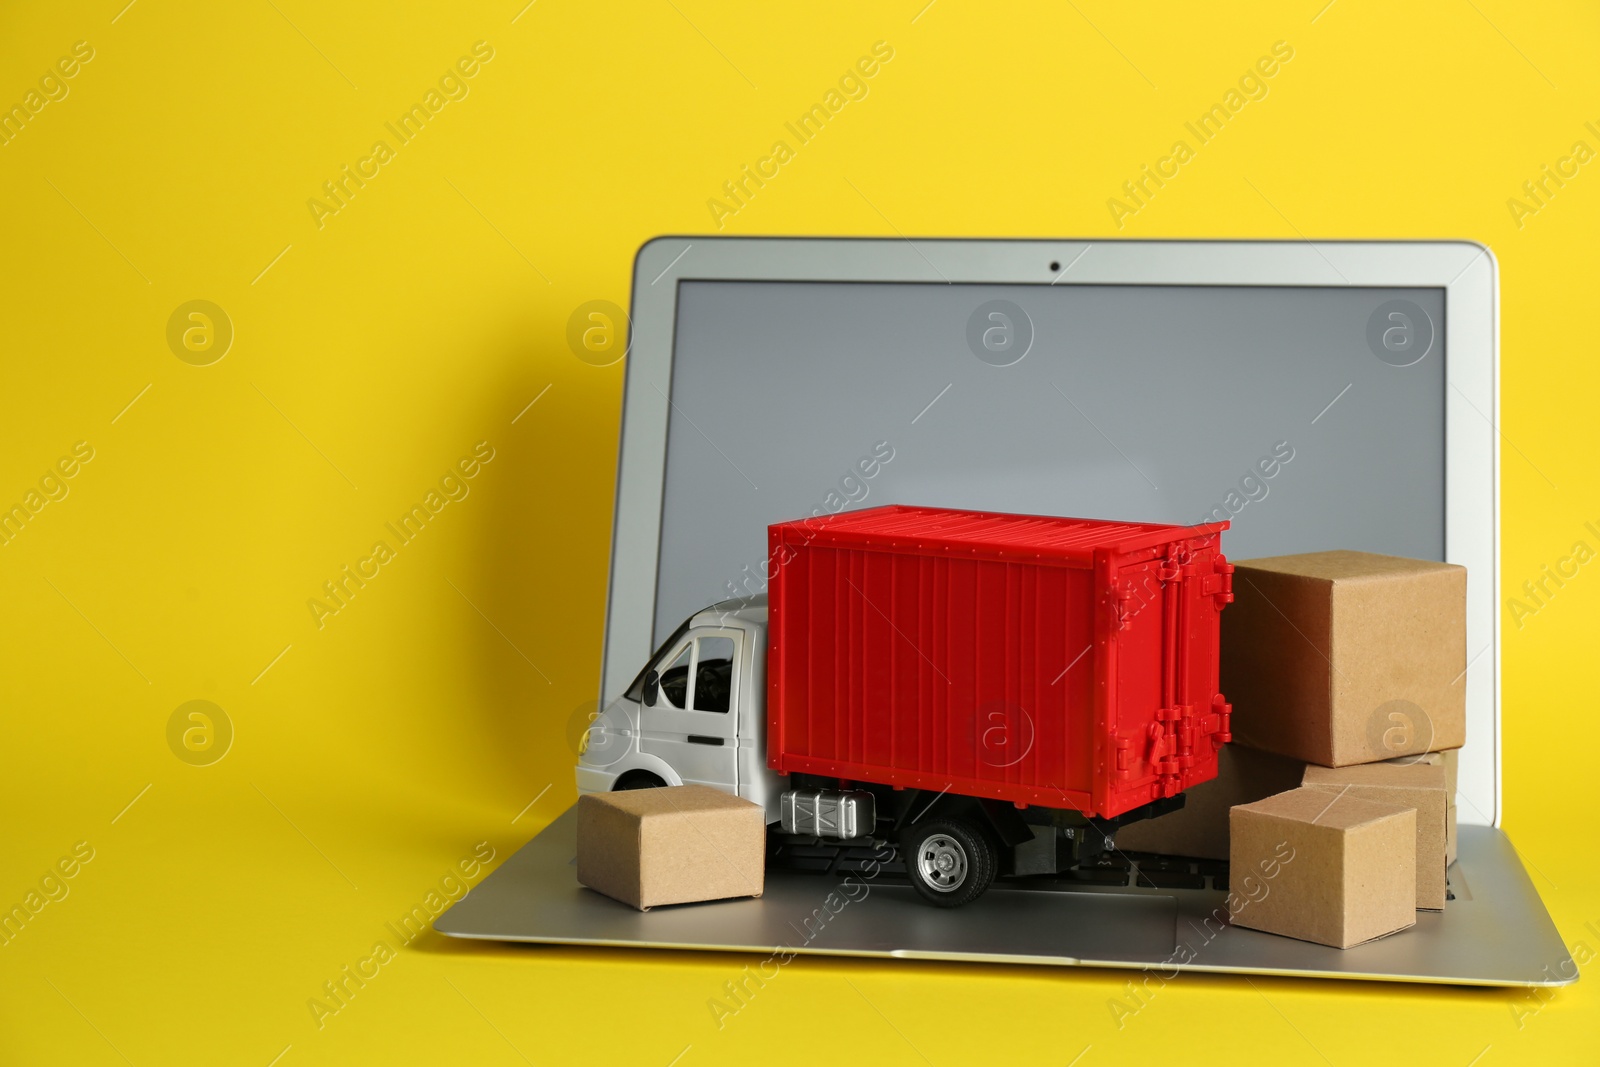 Photo of Laptop, truck model and carton boxes on yellow background. Courier service